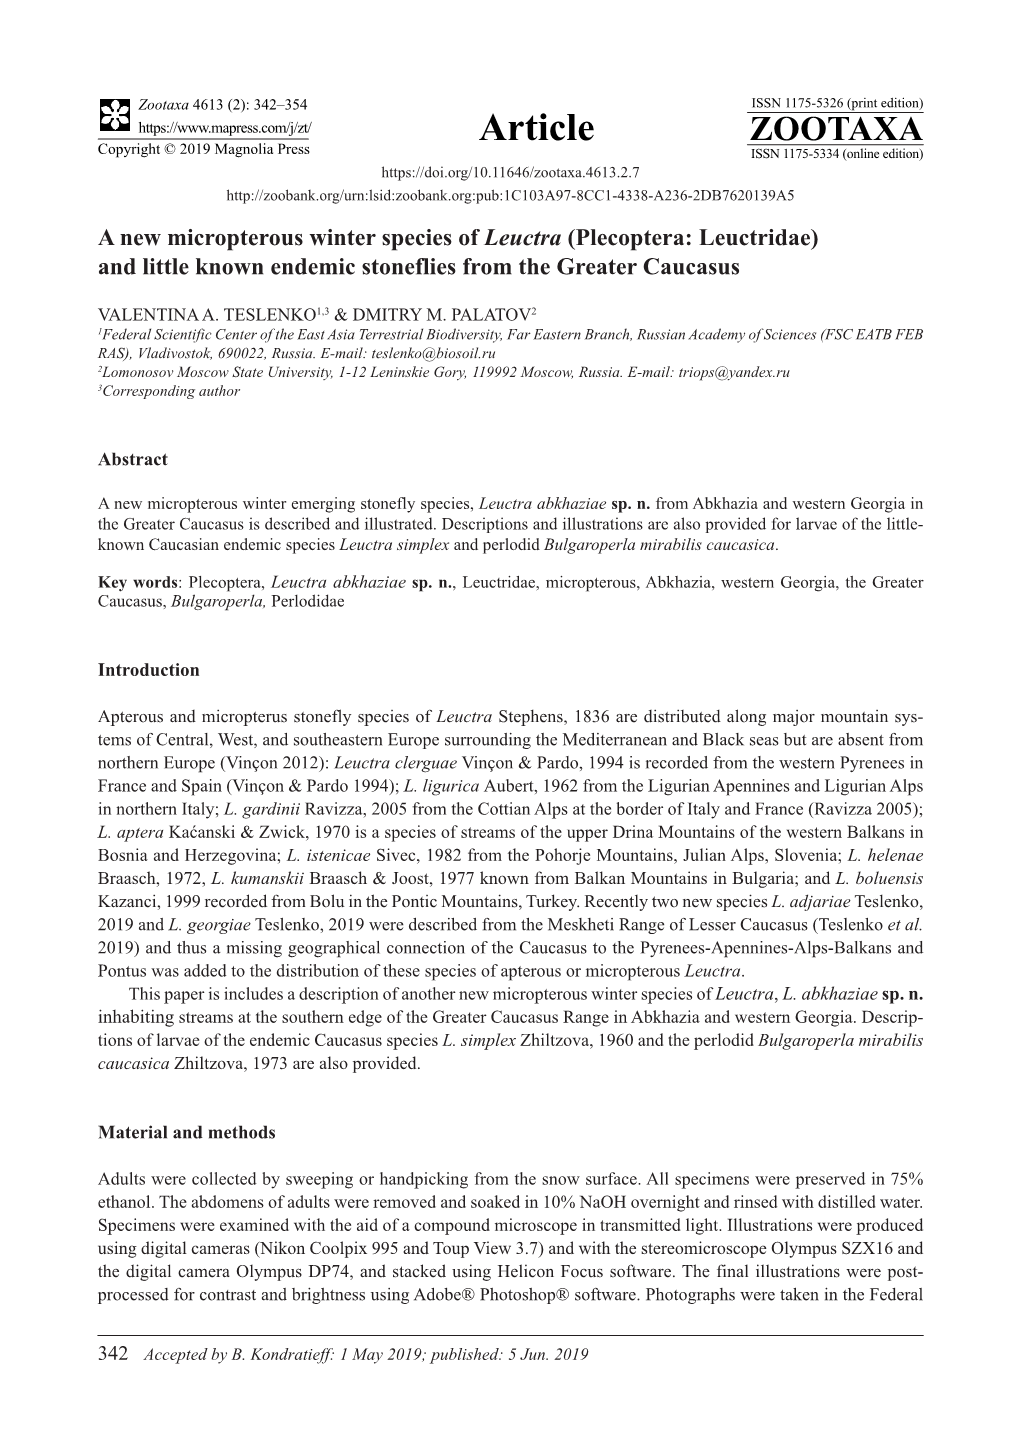 A New Micropterous Winter Species of Leuctra (Plecoptera: Leuctridae) and Little Known Endemic Stoneflies from the Greater Caucasus